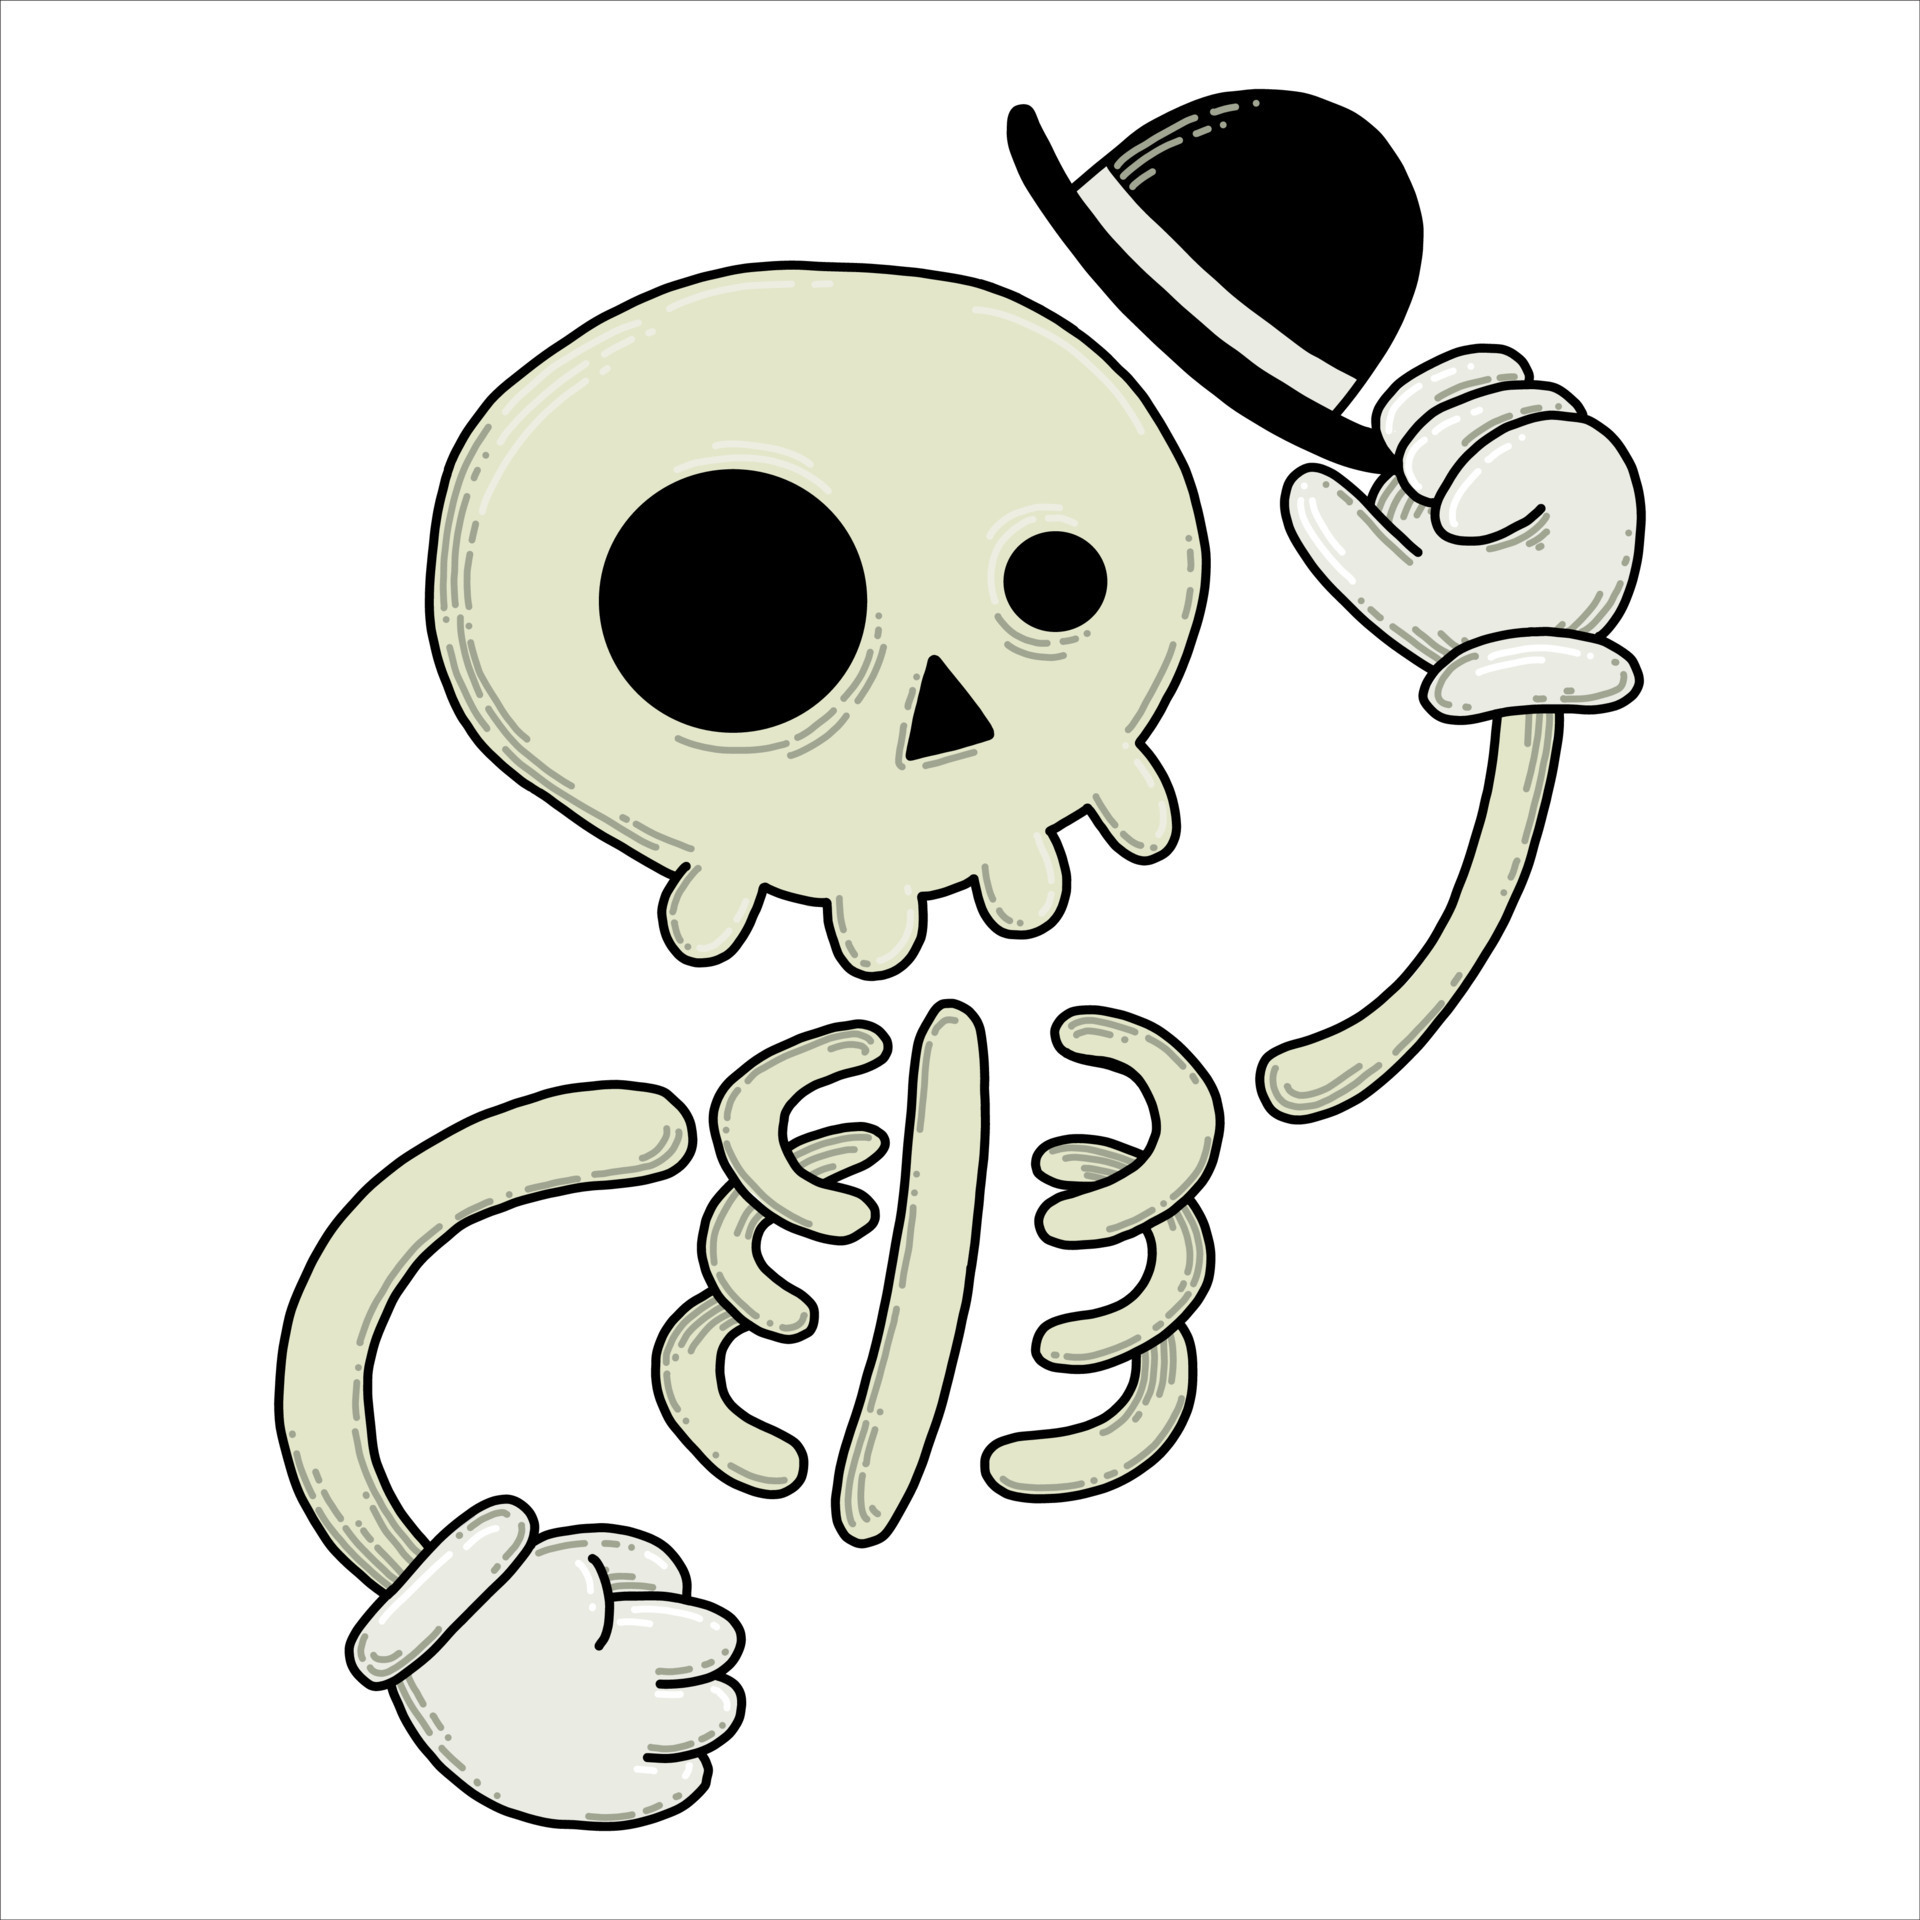 Halloween drawings] How to draw a Skeleton - Easy step by step